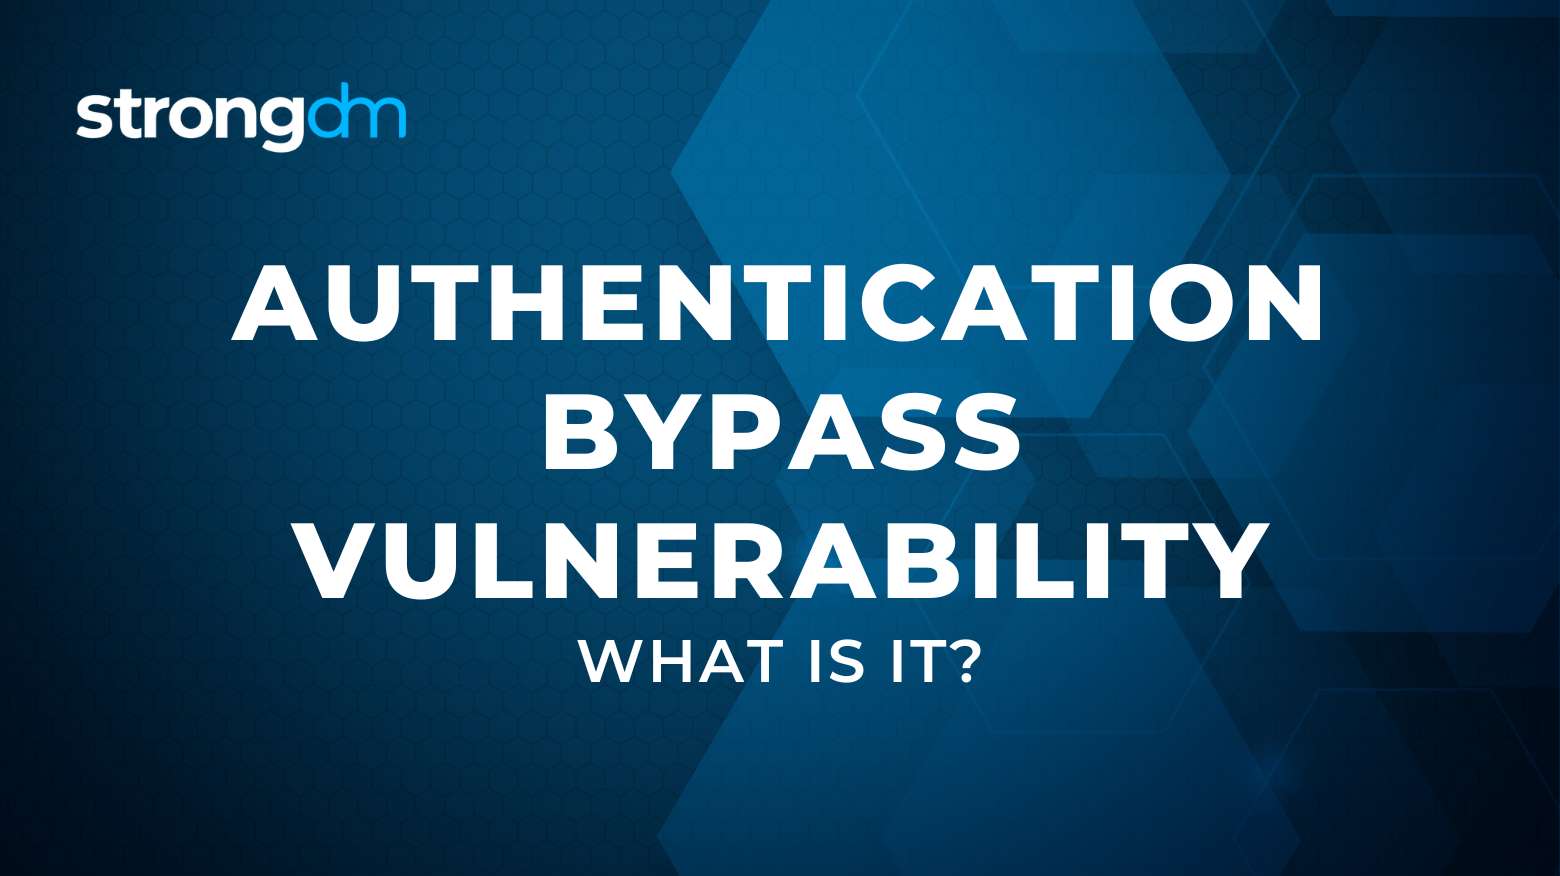 What Is an Authentication Bypass Vulnerability?